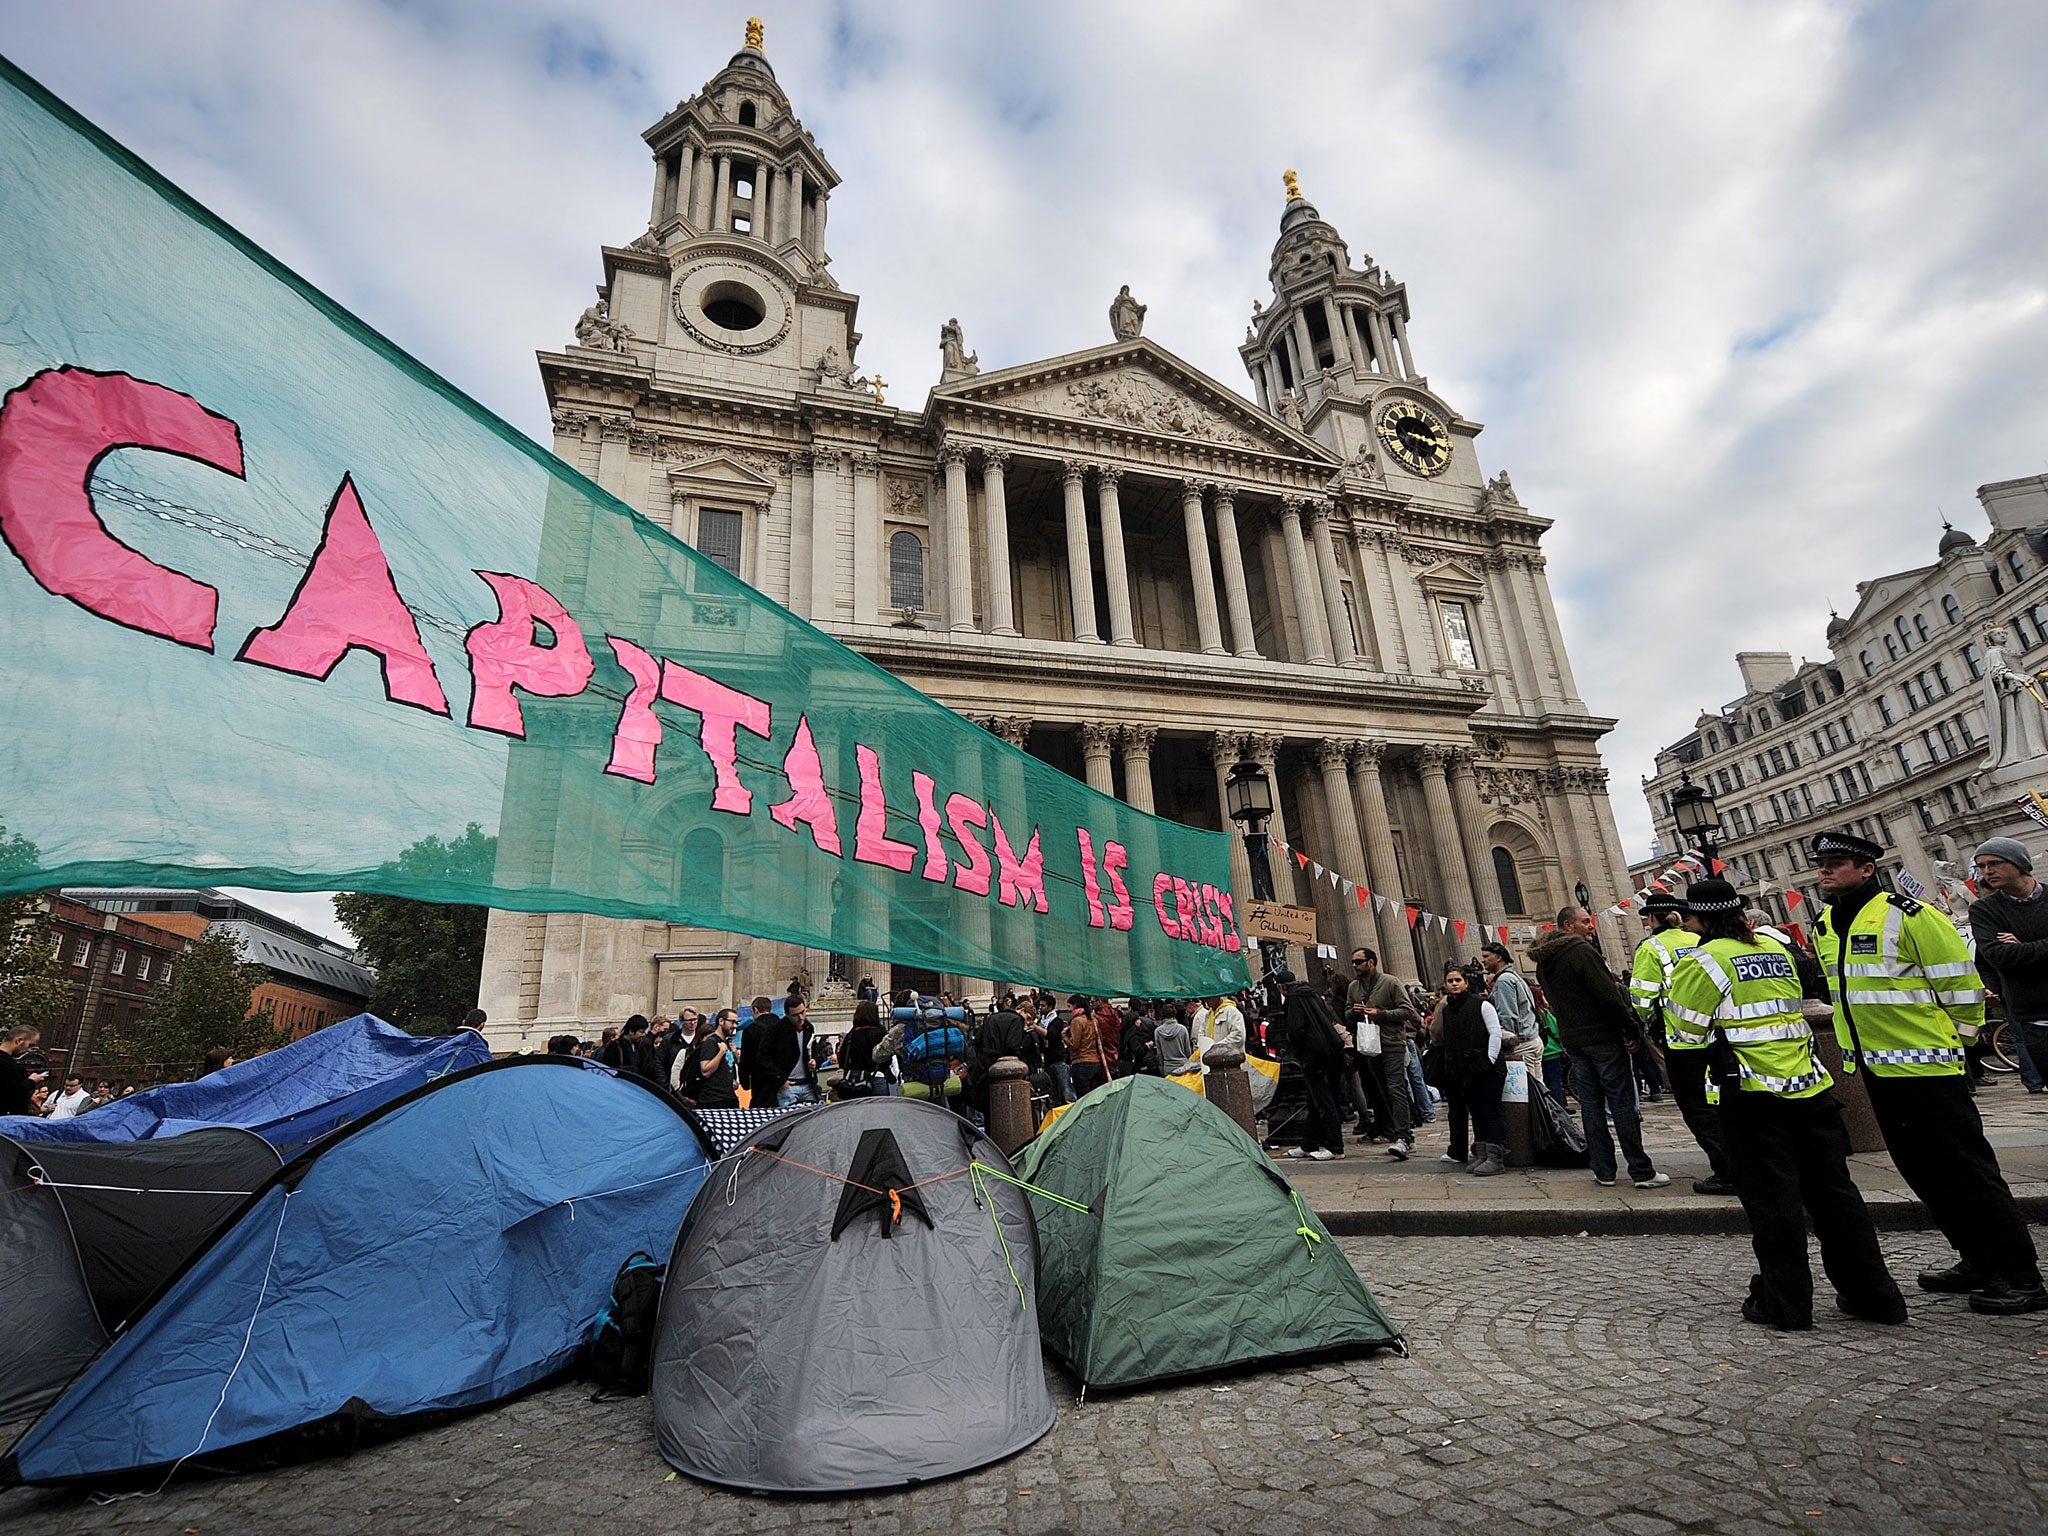 Protests such as that by the Occupy movement outside St Paul's Cathedral in 2011 could be affected